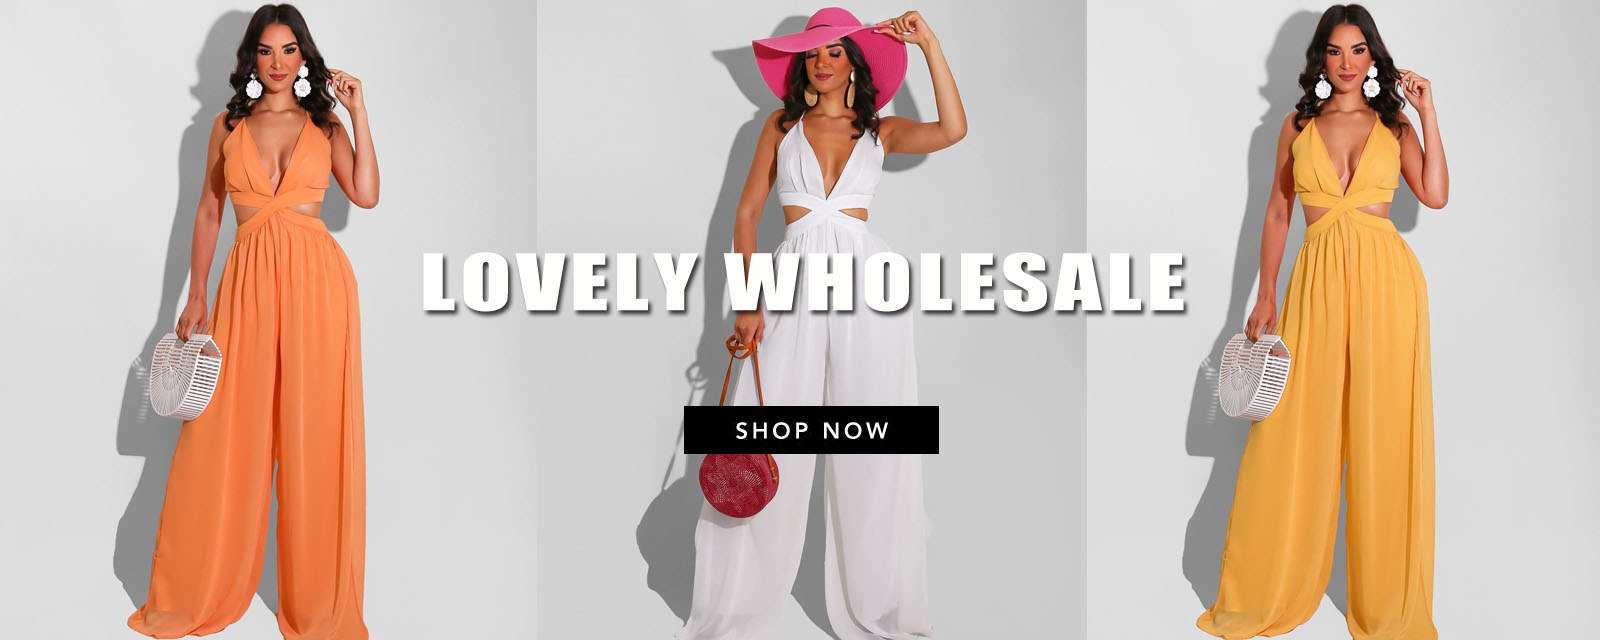 lovely wholesale